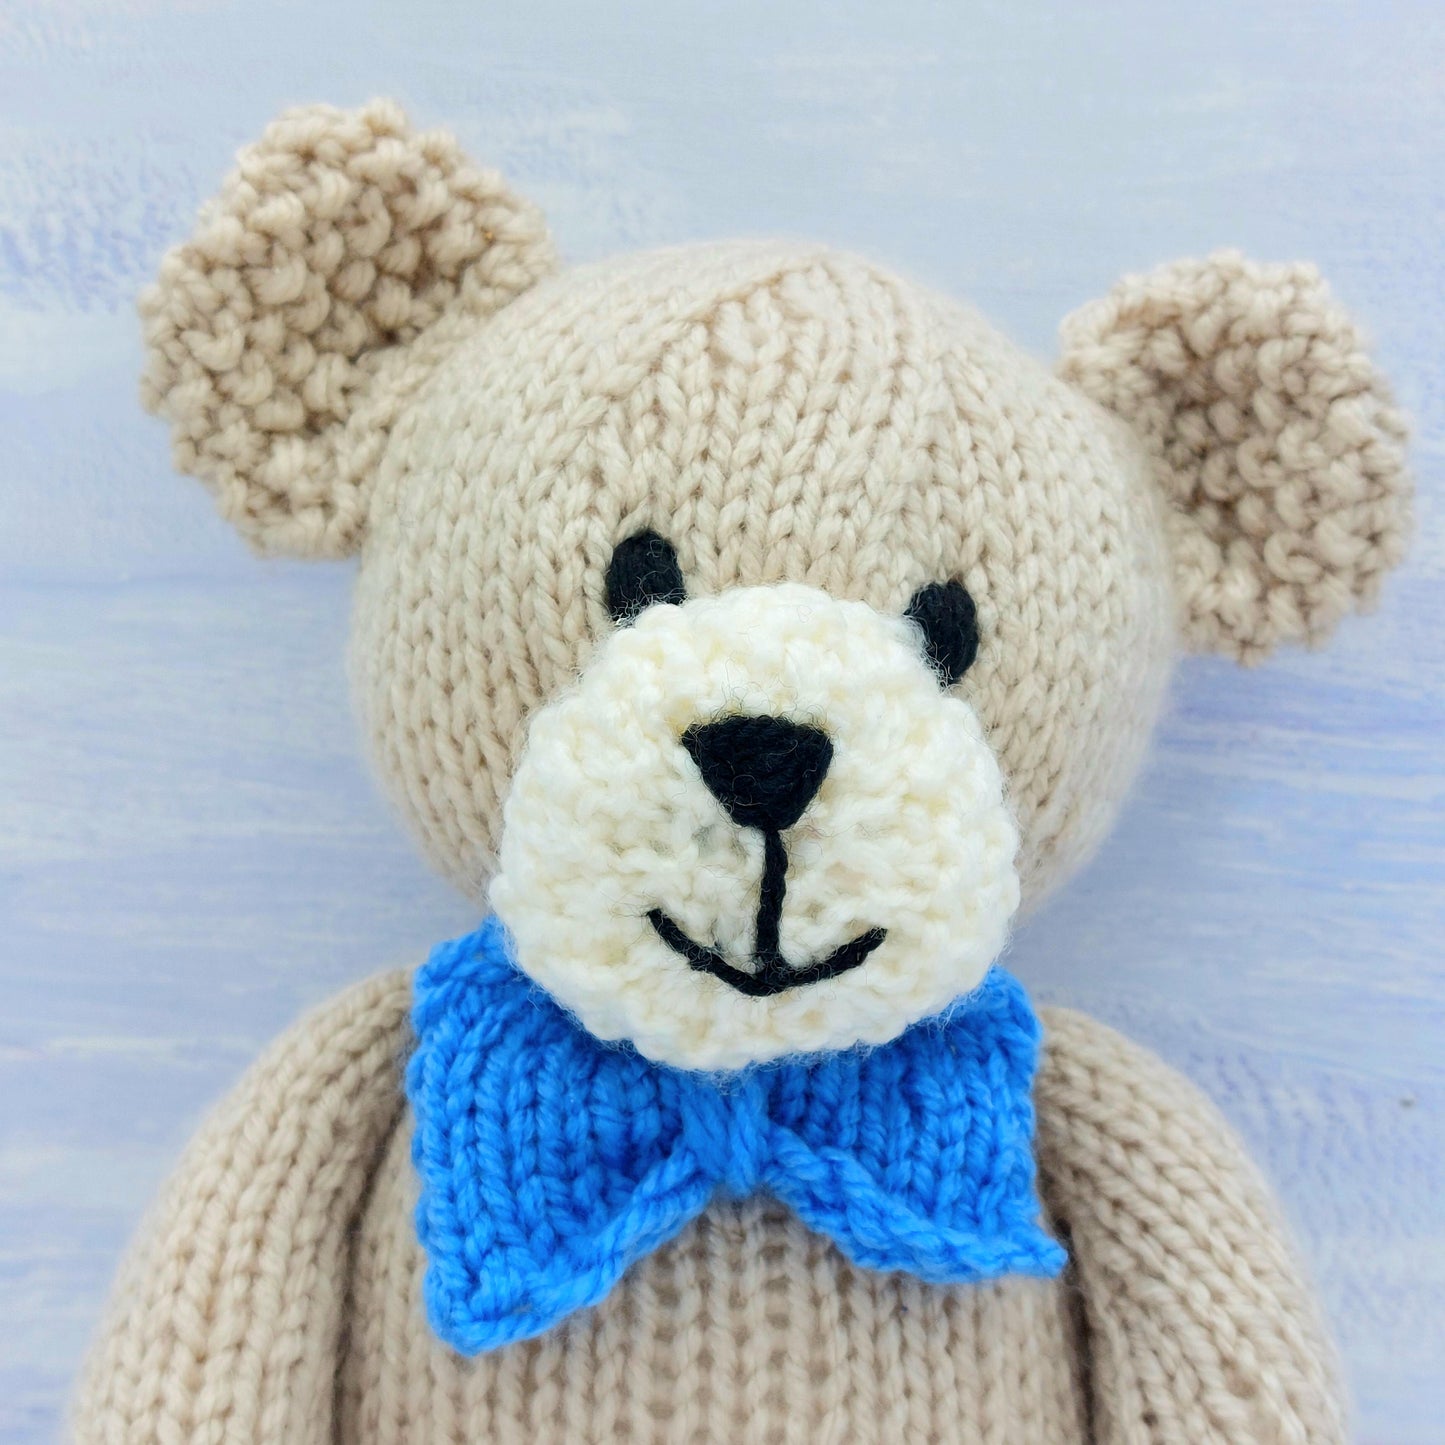 Knitted Tommy & Tilly the Bears - PDF Knitting Pattern